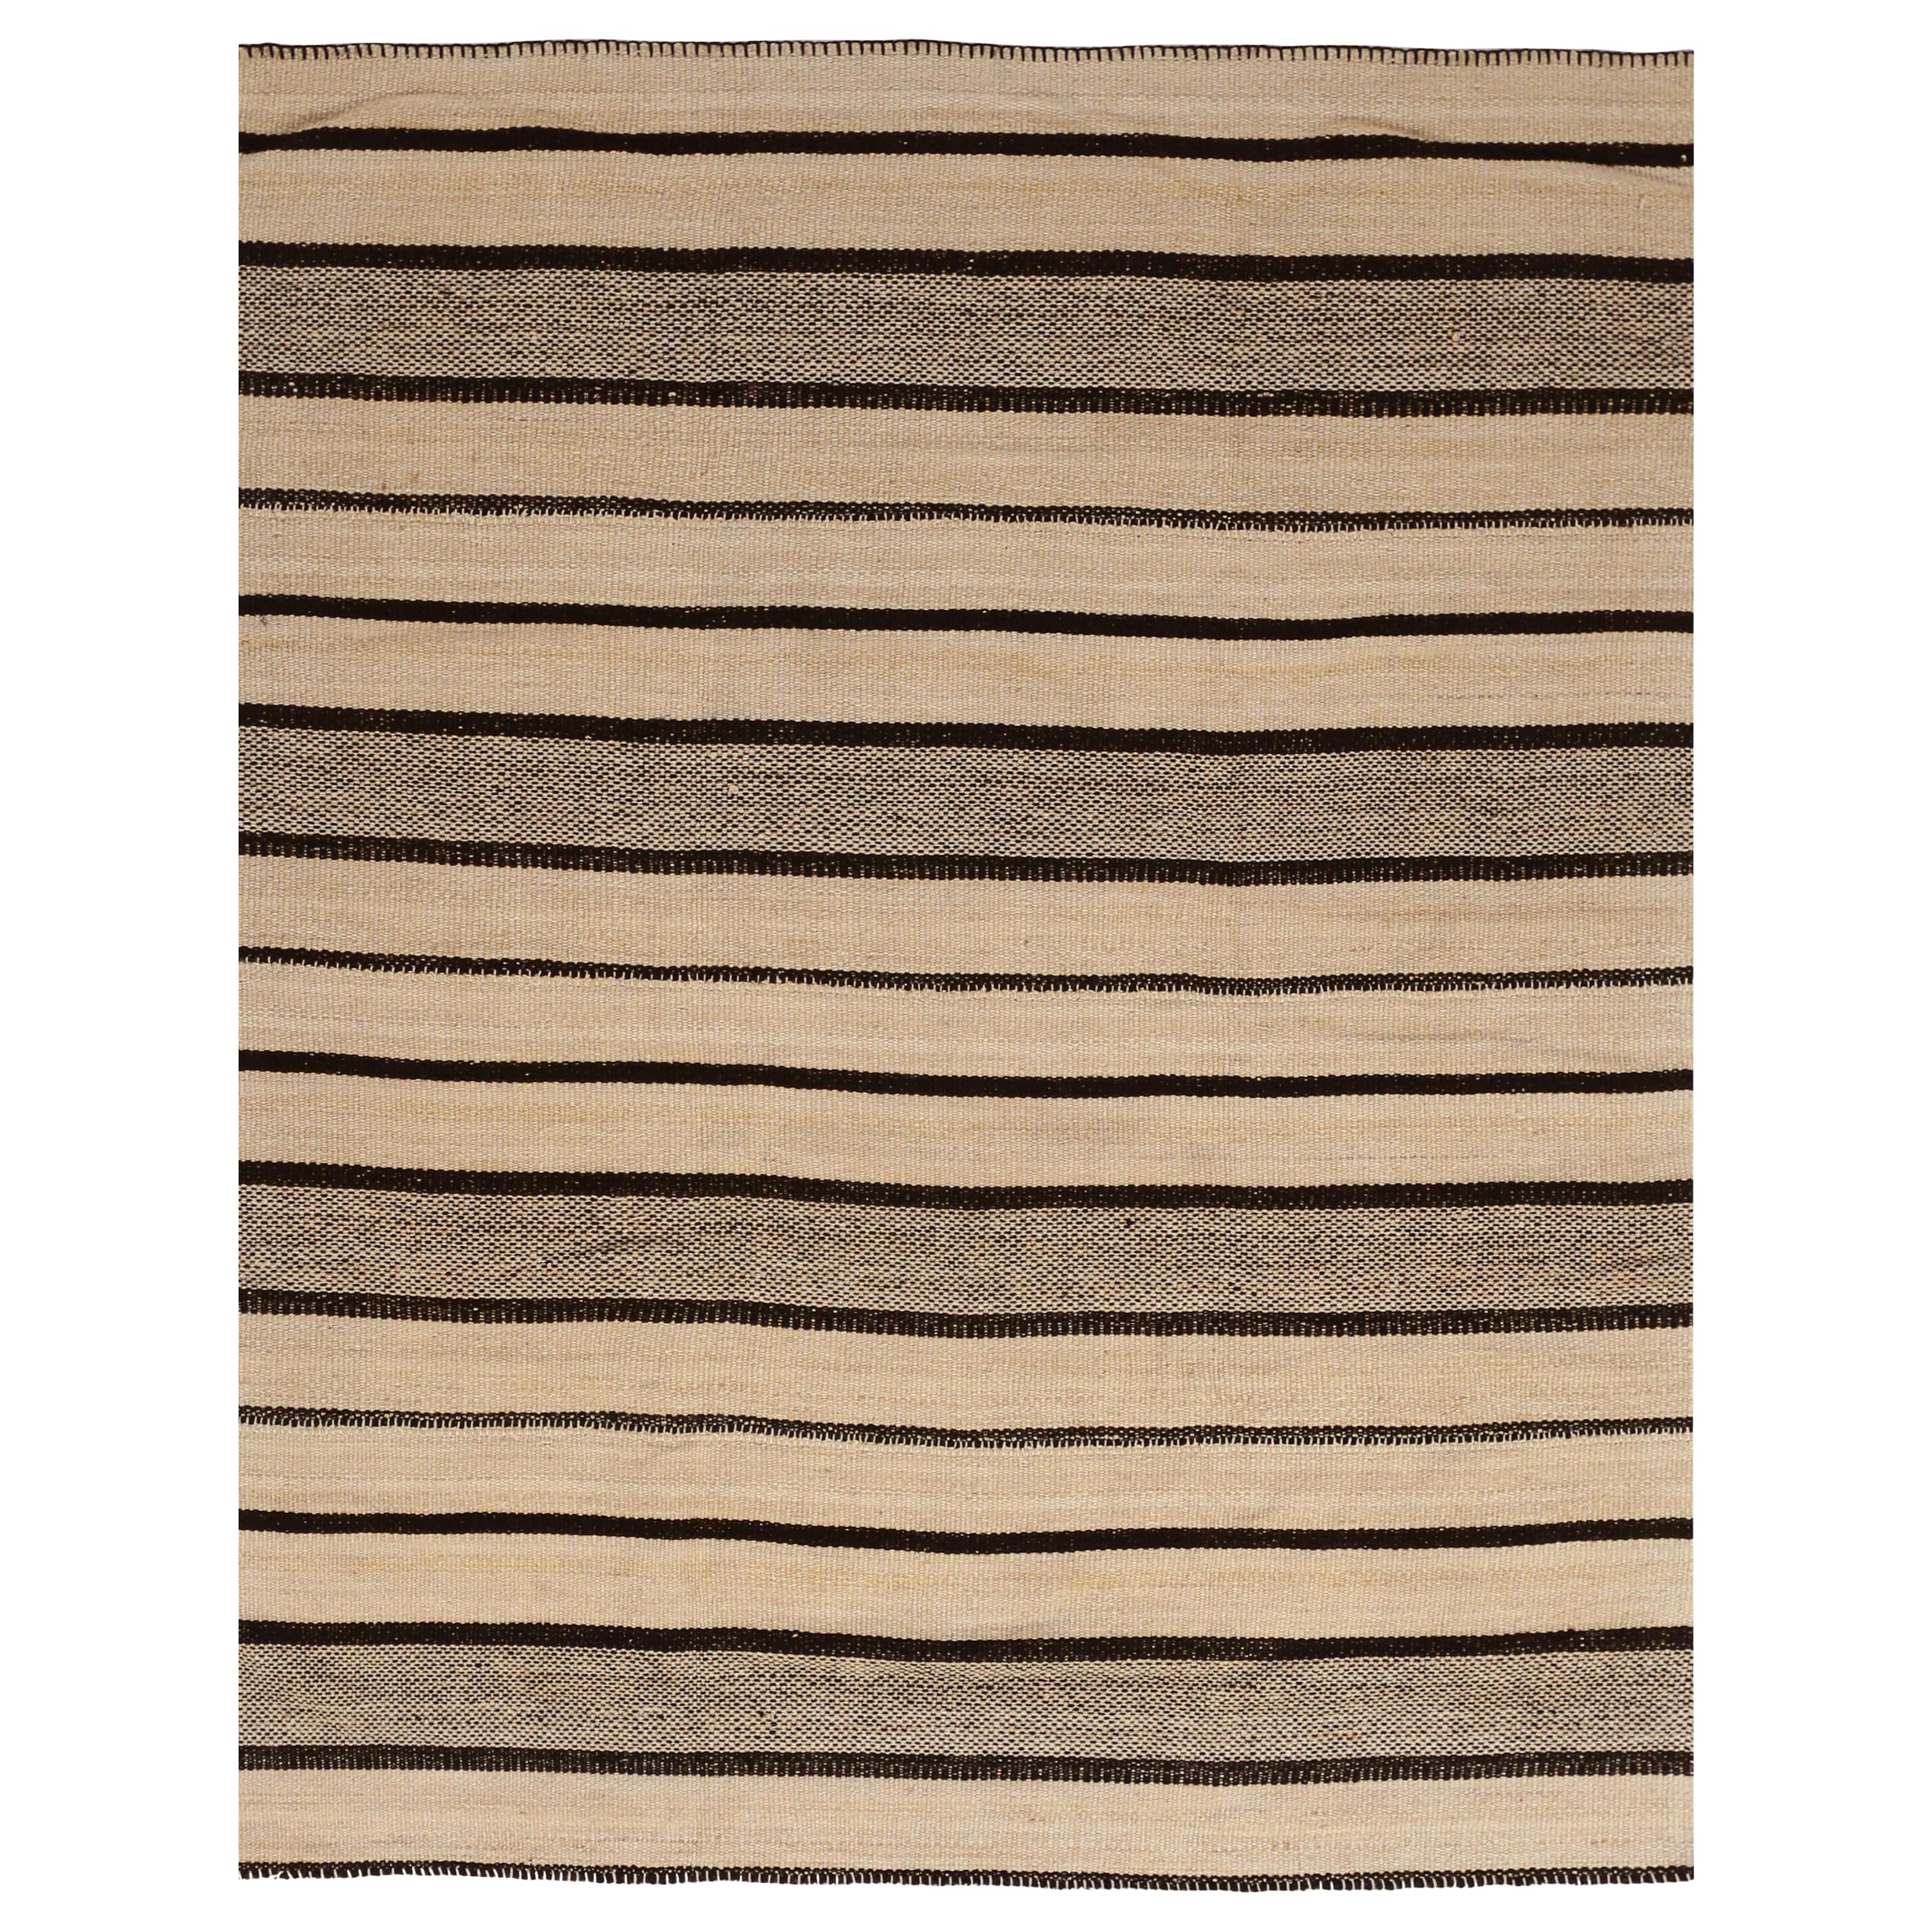 New Kilim Persian Rug with Thick and Thin Stripes in Black and Beige For Sale